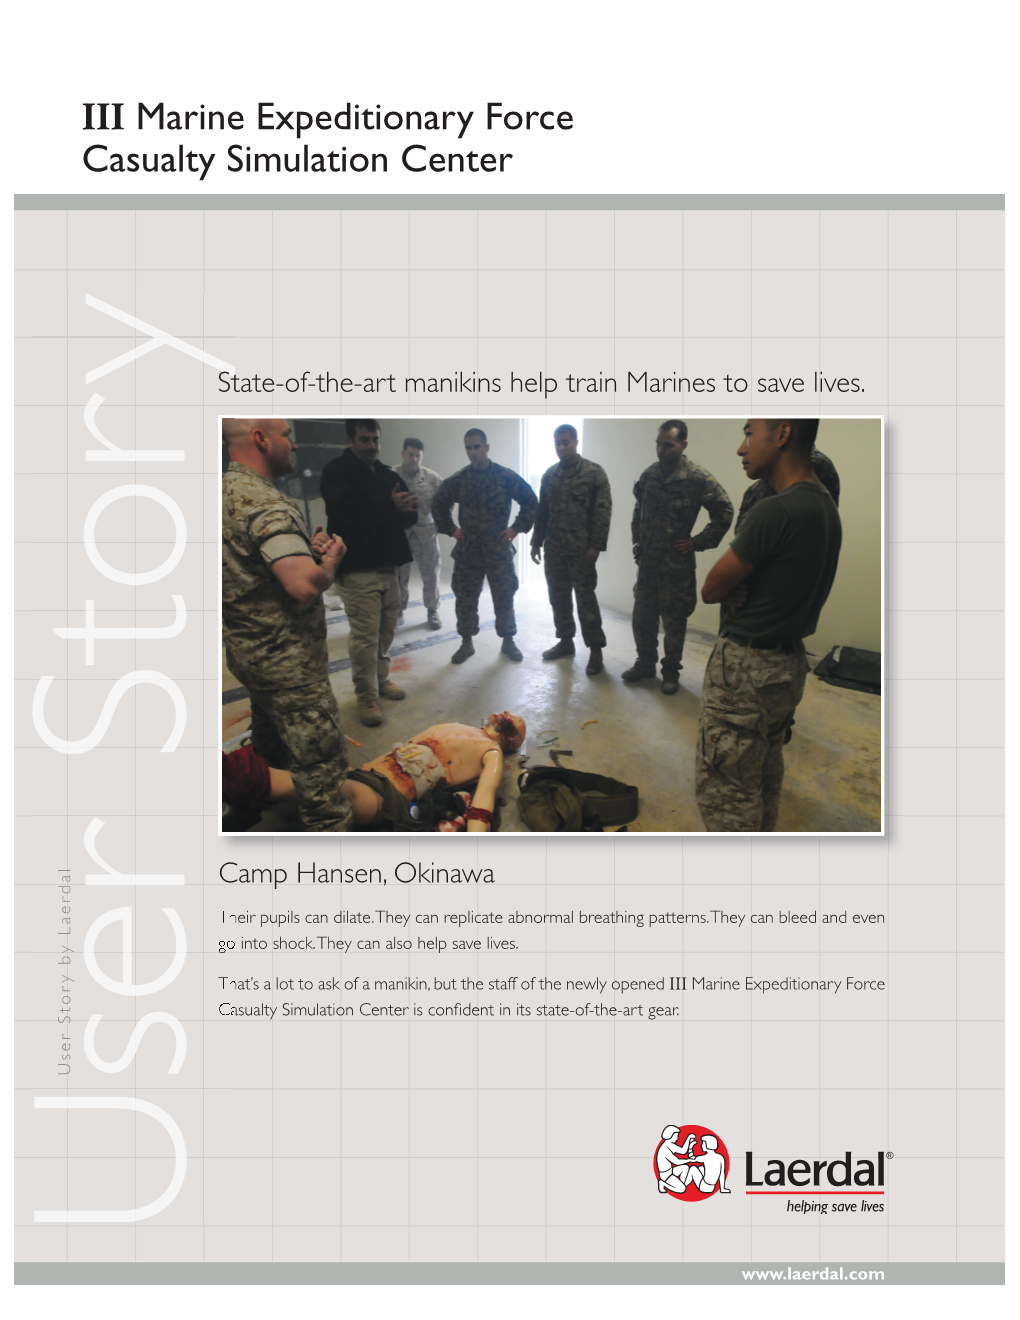 III Marine Expeditionary Force Casualty Simulation Center